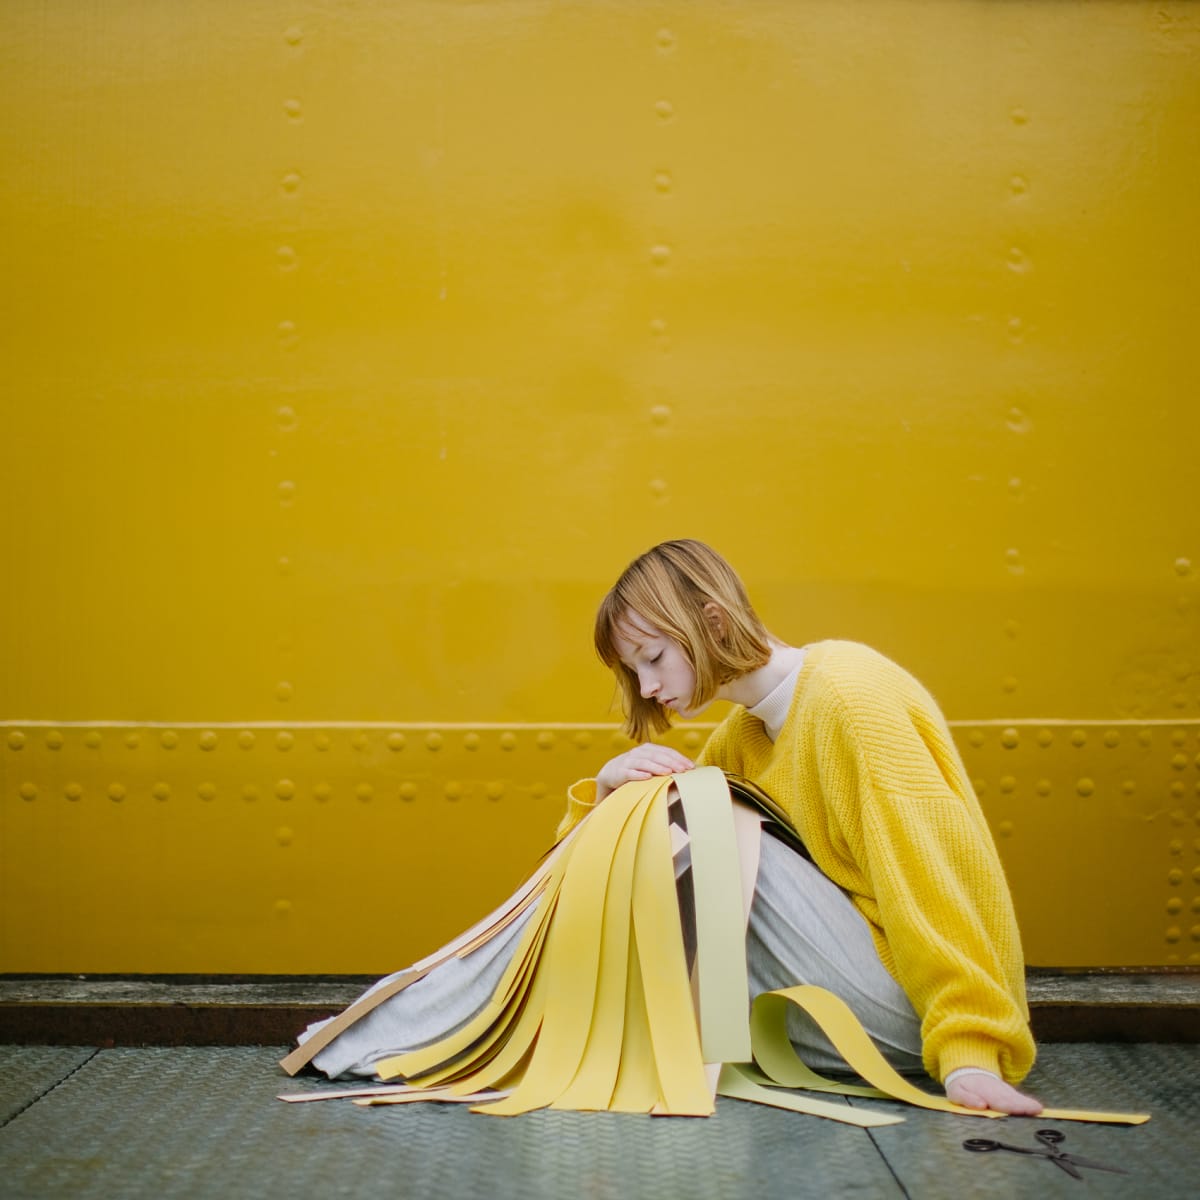 Yellow by Dasha Pears  Image: The image pictures a person who did cut off all the narratives that she had about herself and is in a transition phase: she knows that she doesn't want to go back to the past, but is a bit unsure of what the future holds. We all have periods of rumination over some changes that we when through in life: "was it the right thing to do? what if I destroyed my life by doing that?". The truth however is that we have pieces that we can't put back into a sheet, but we can glue something new and absolutely amazing from of them.